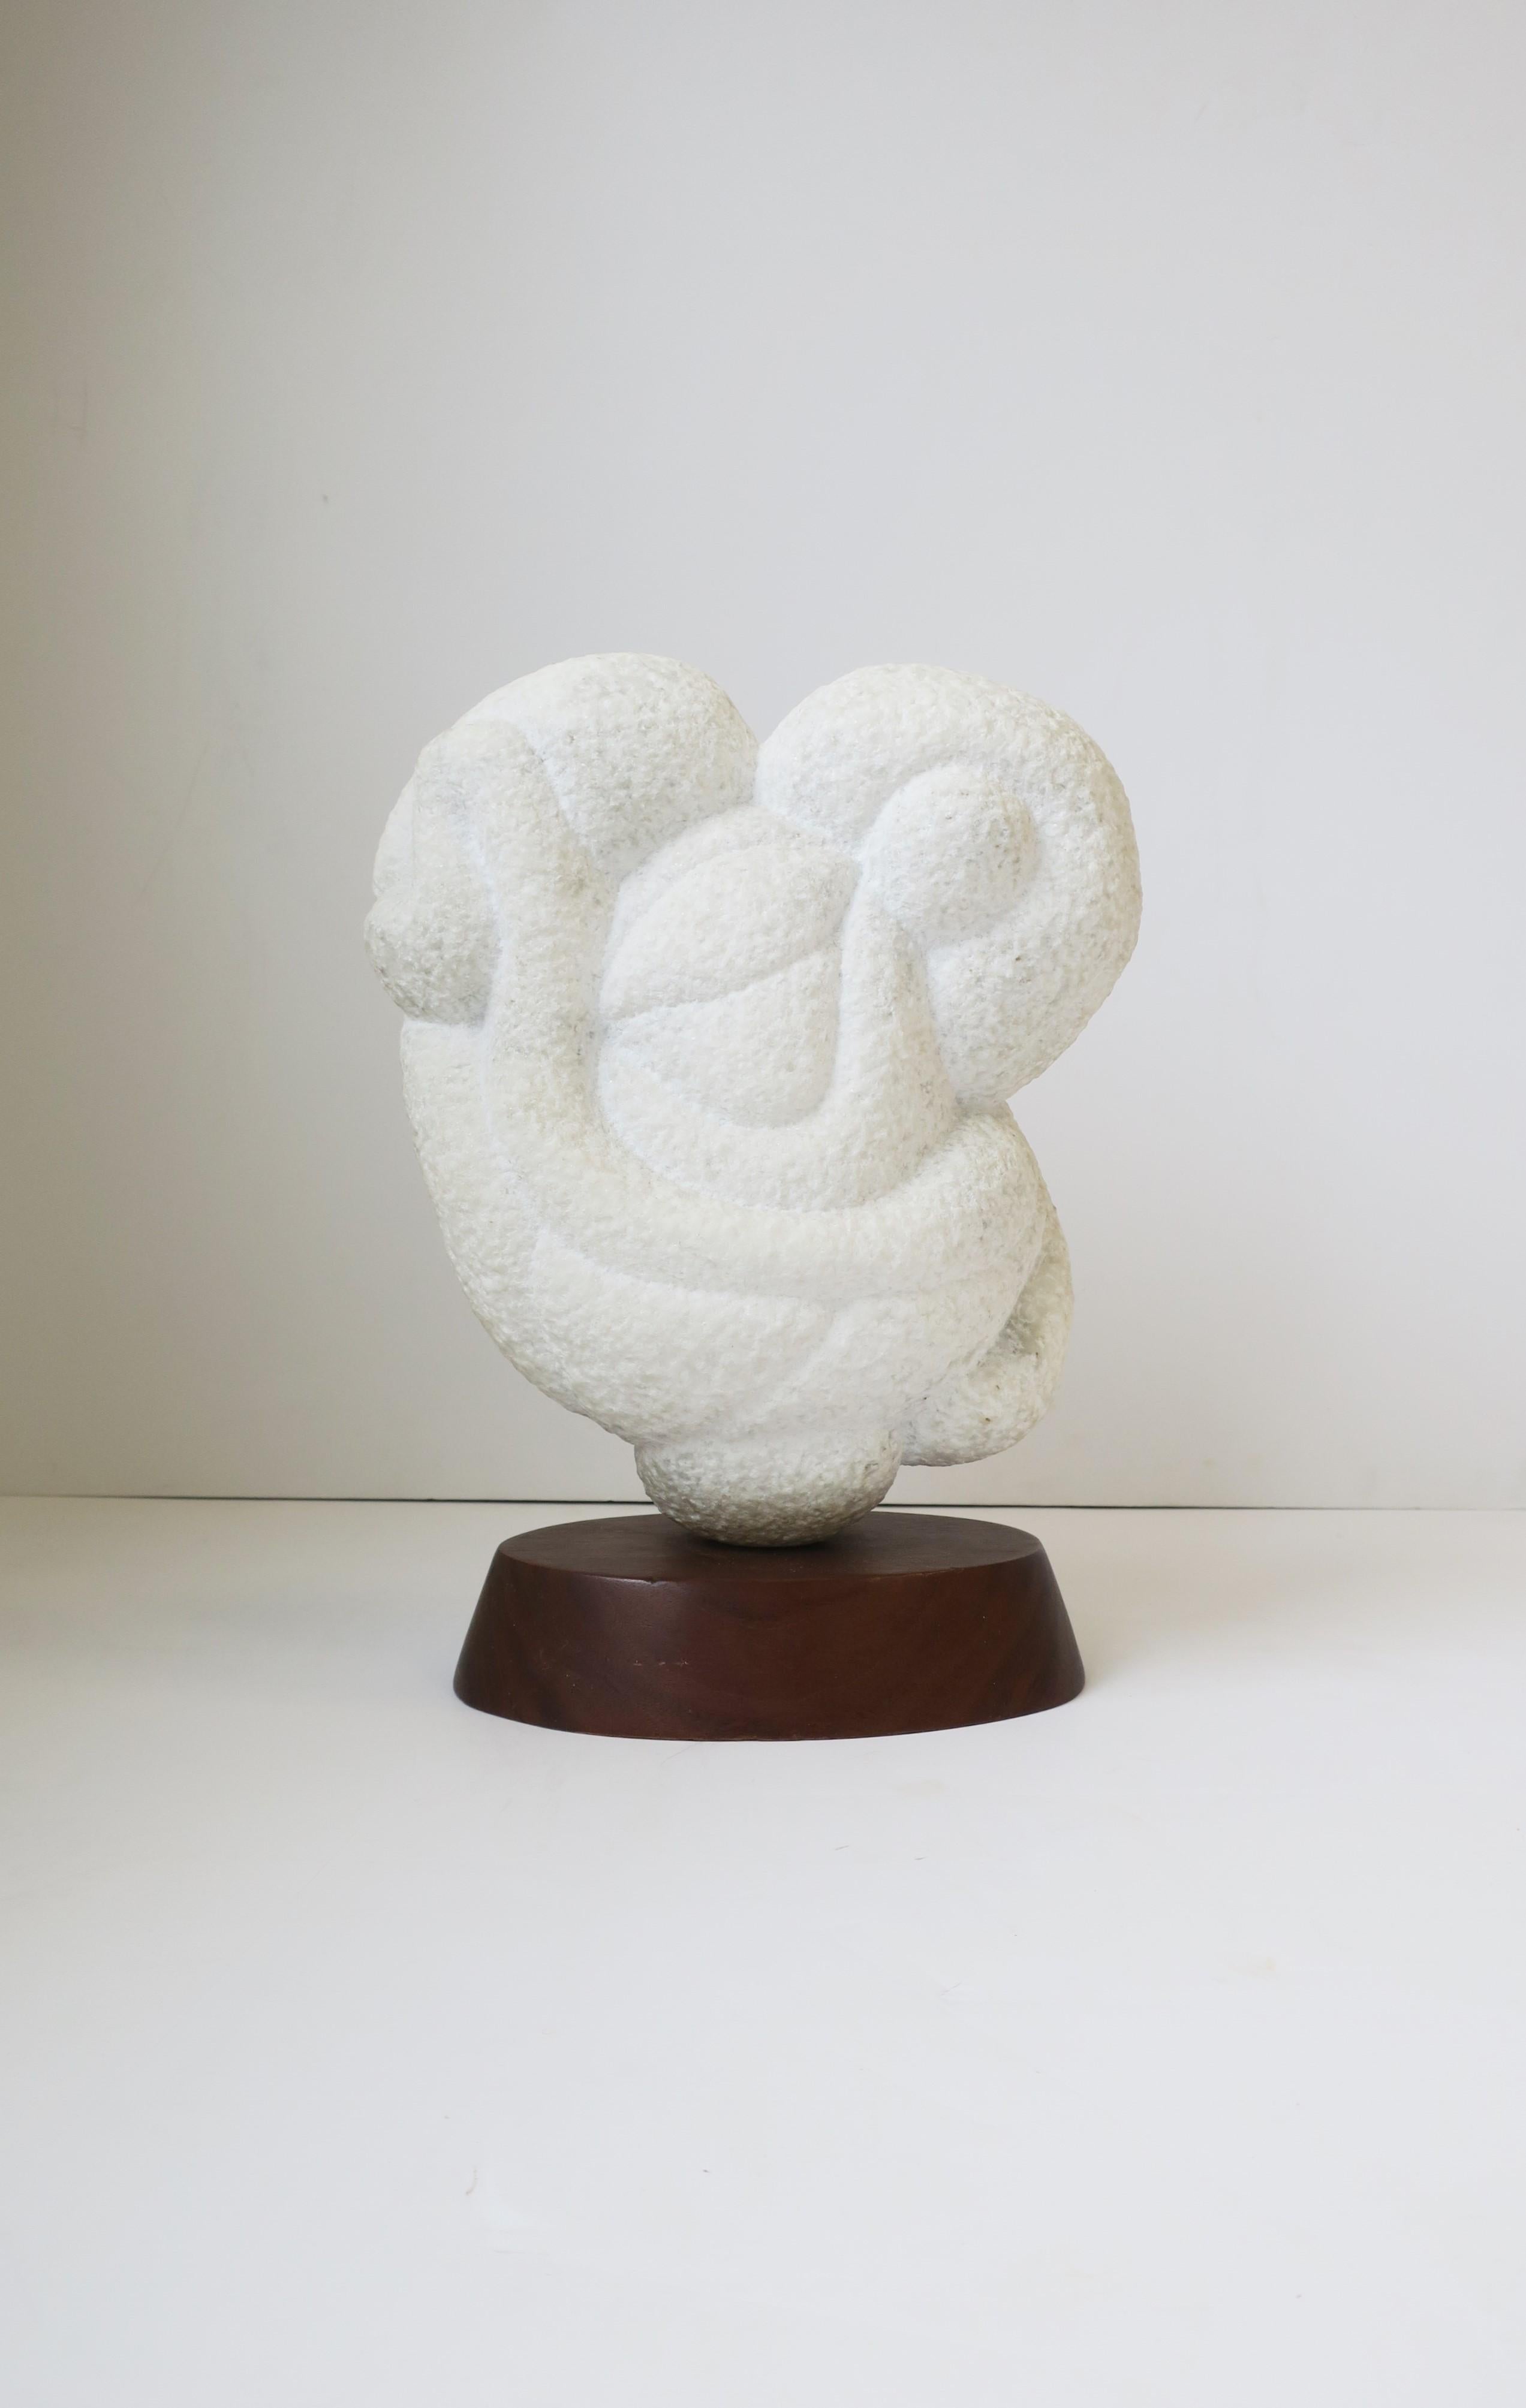 A substantial white granite marble abstract sculpture piece on an oval wood base. Piece measures 13.5